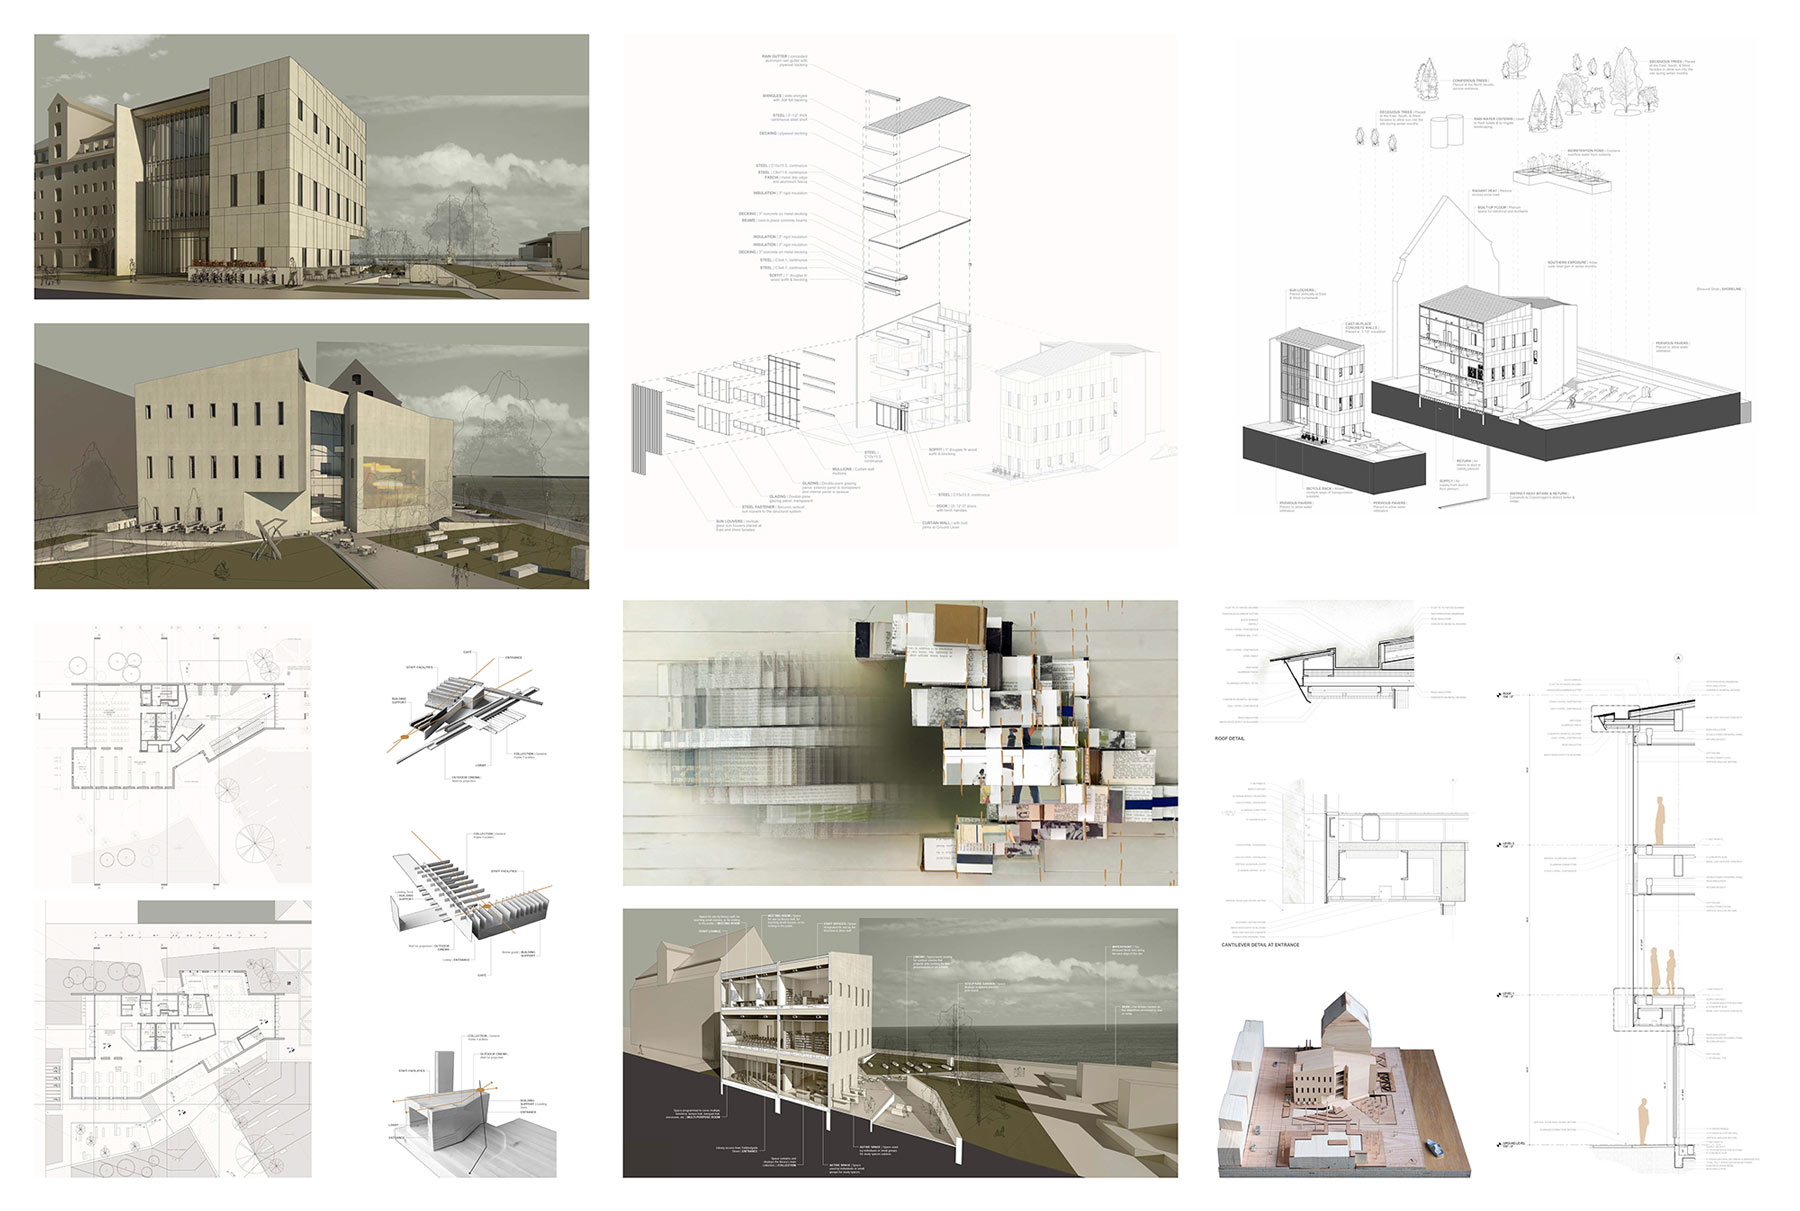 A collage with fourteen different photos. Most of them blueprints, but four contain mock-animations of what the buildings would look like. The building is light colored with three different sections. The section to the far right is rectangular with thin rectangular windows. The middle section is mostly glass. The left section is a longer stretch of building with small square windows.